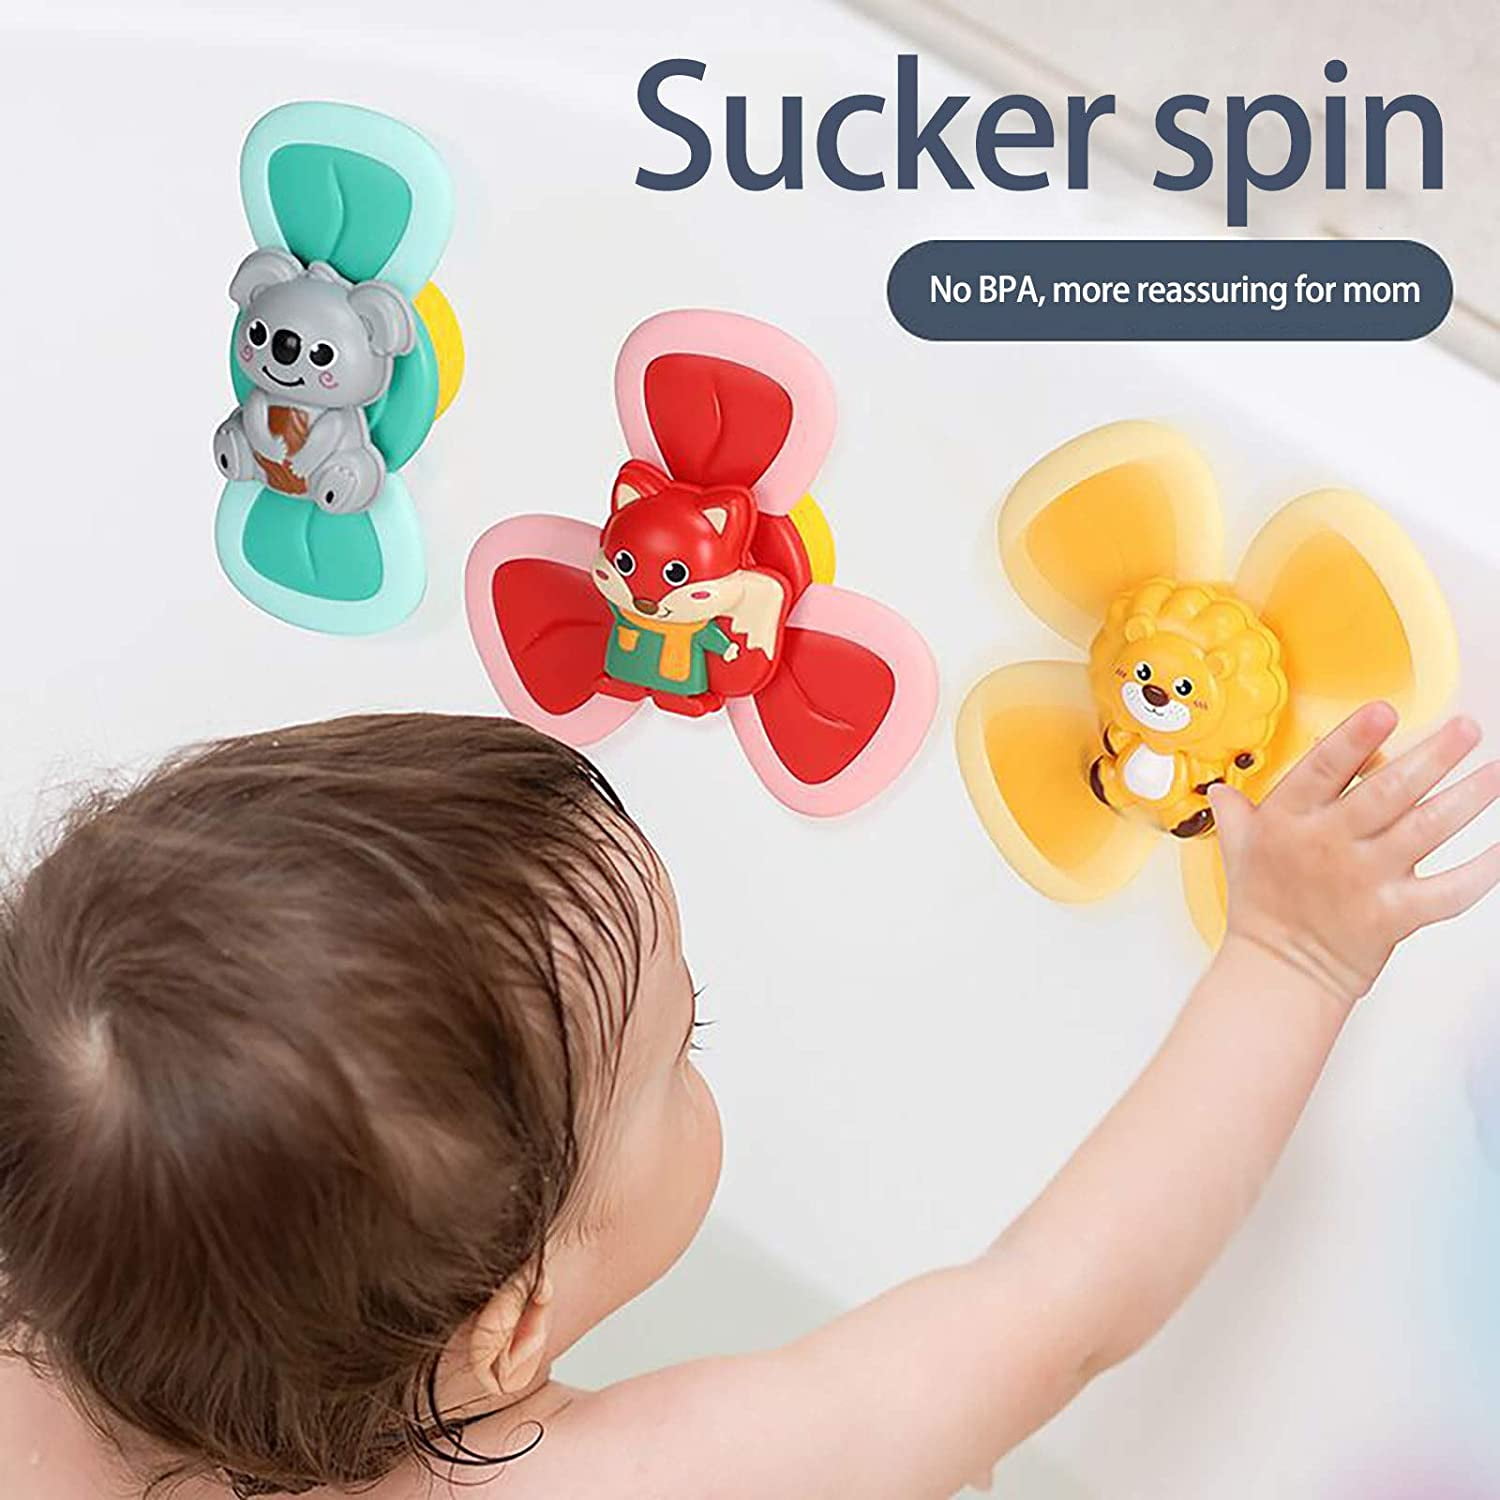 3x Suction Cup Top Toy Baby Bath Toys Spin Sucker Spinner Toy For Baby Kids Game 